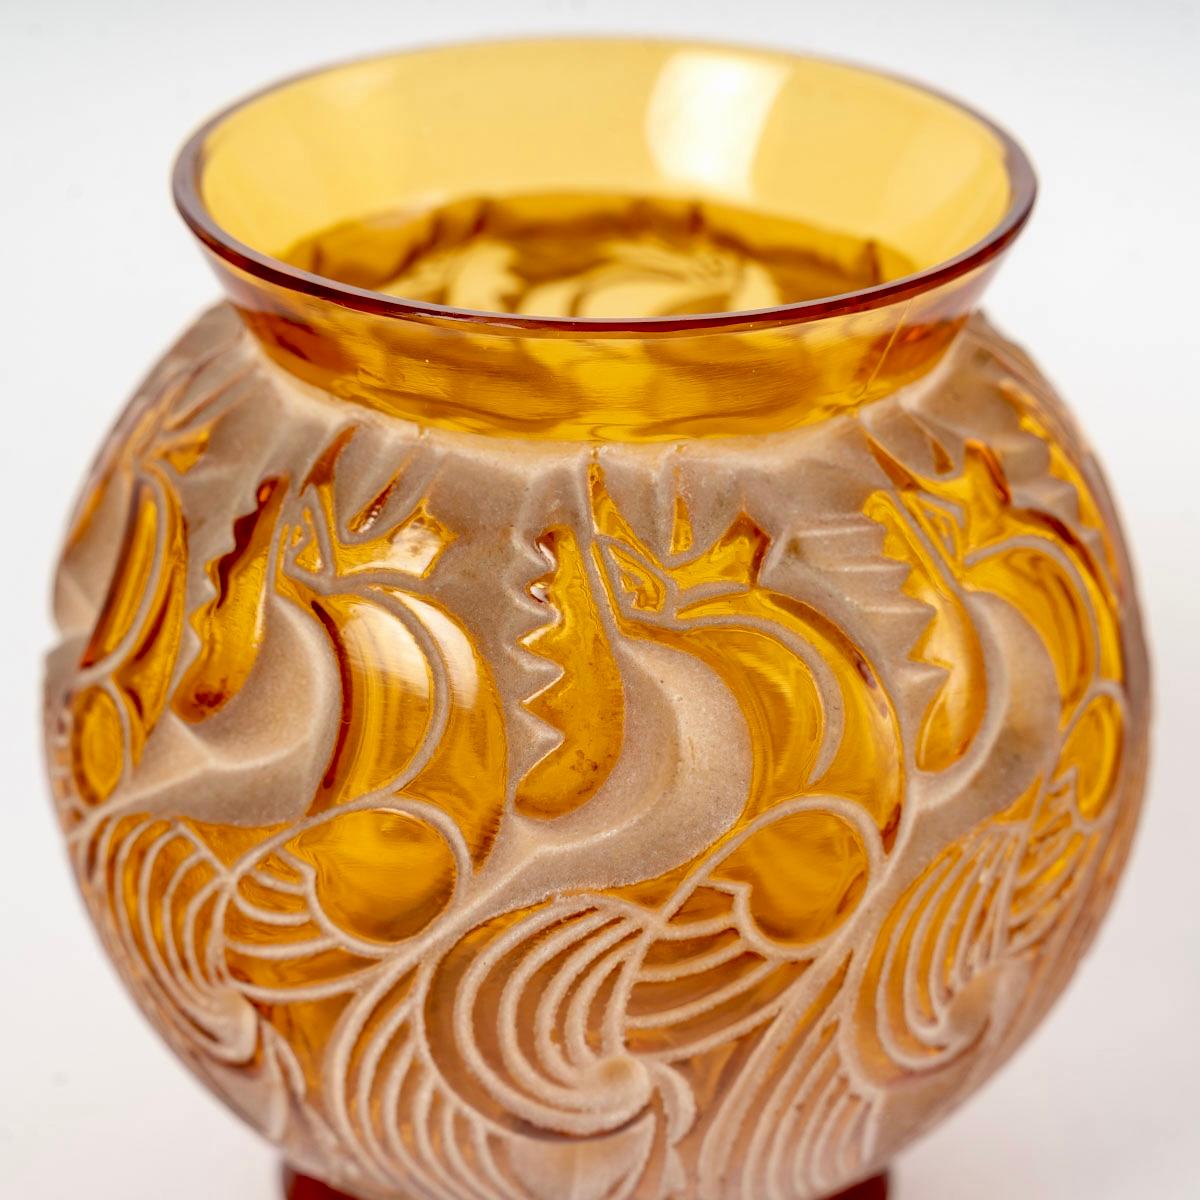 French 1931 René Lalique, Vase Le Mans Amber Yellow Glass with Beige Patina